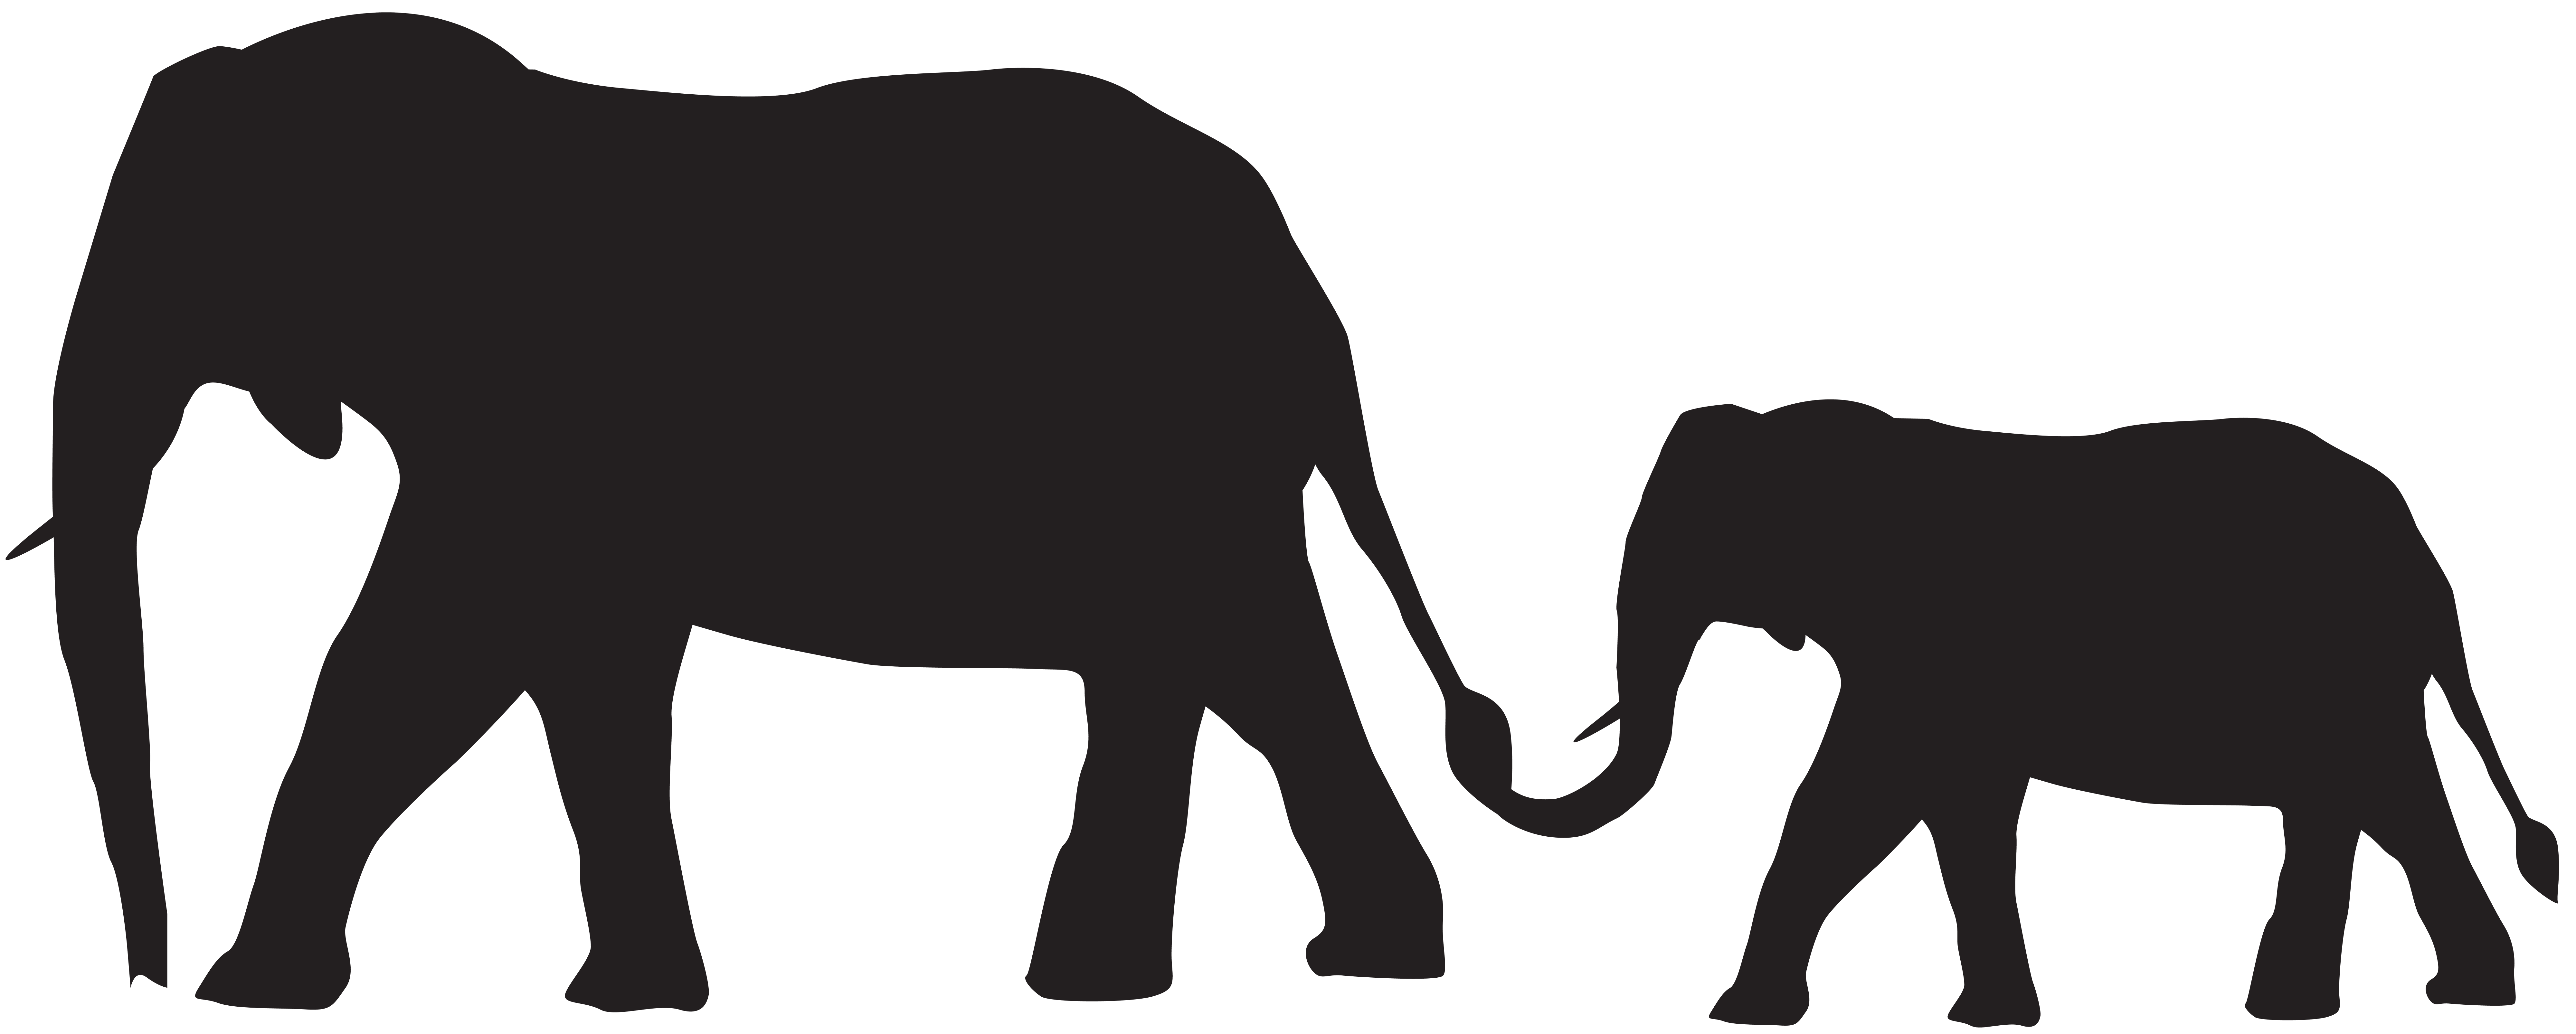 Mother and Baby Elephants Silhouette PNG Clip Art Image.